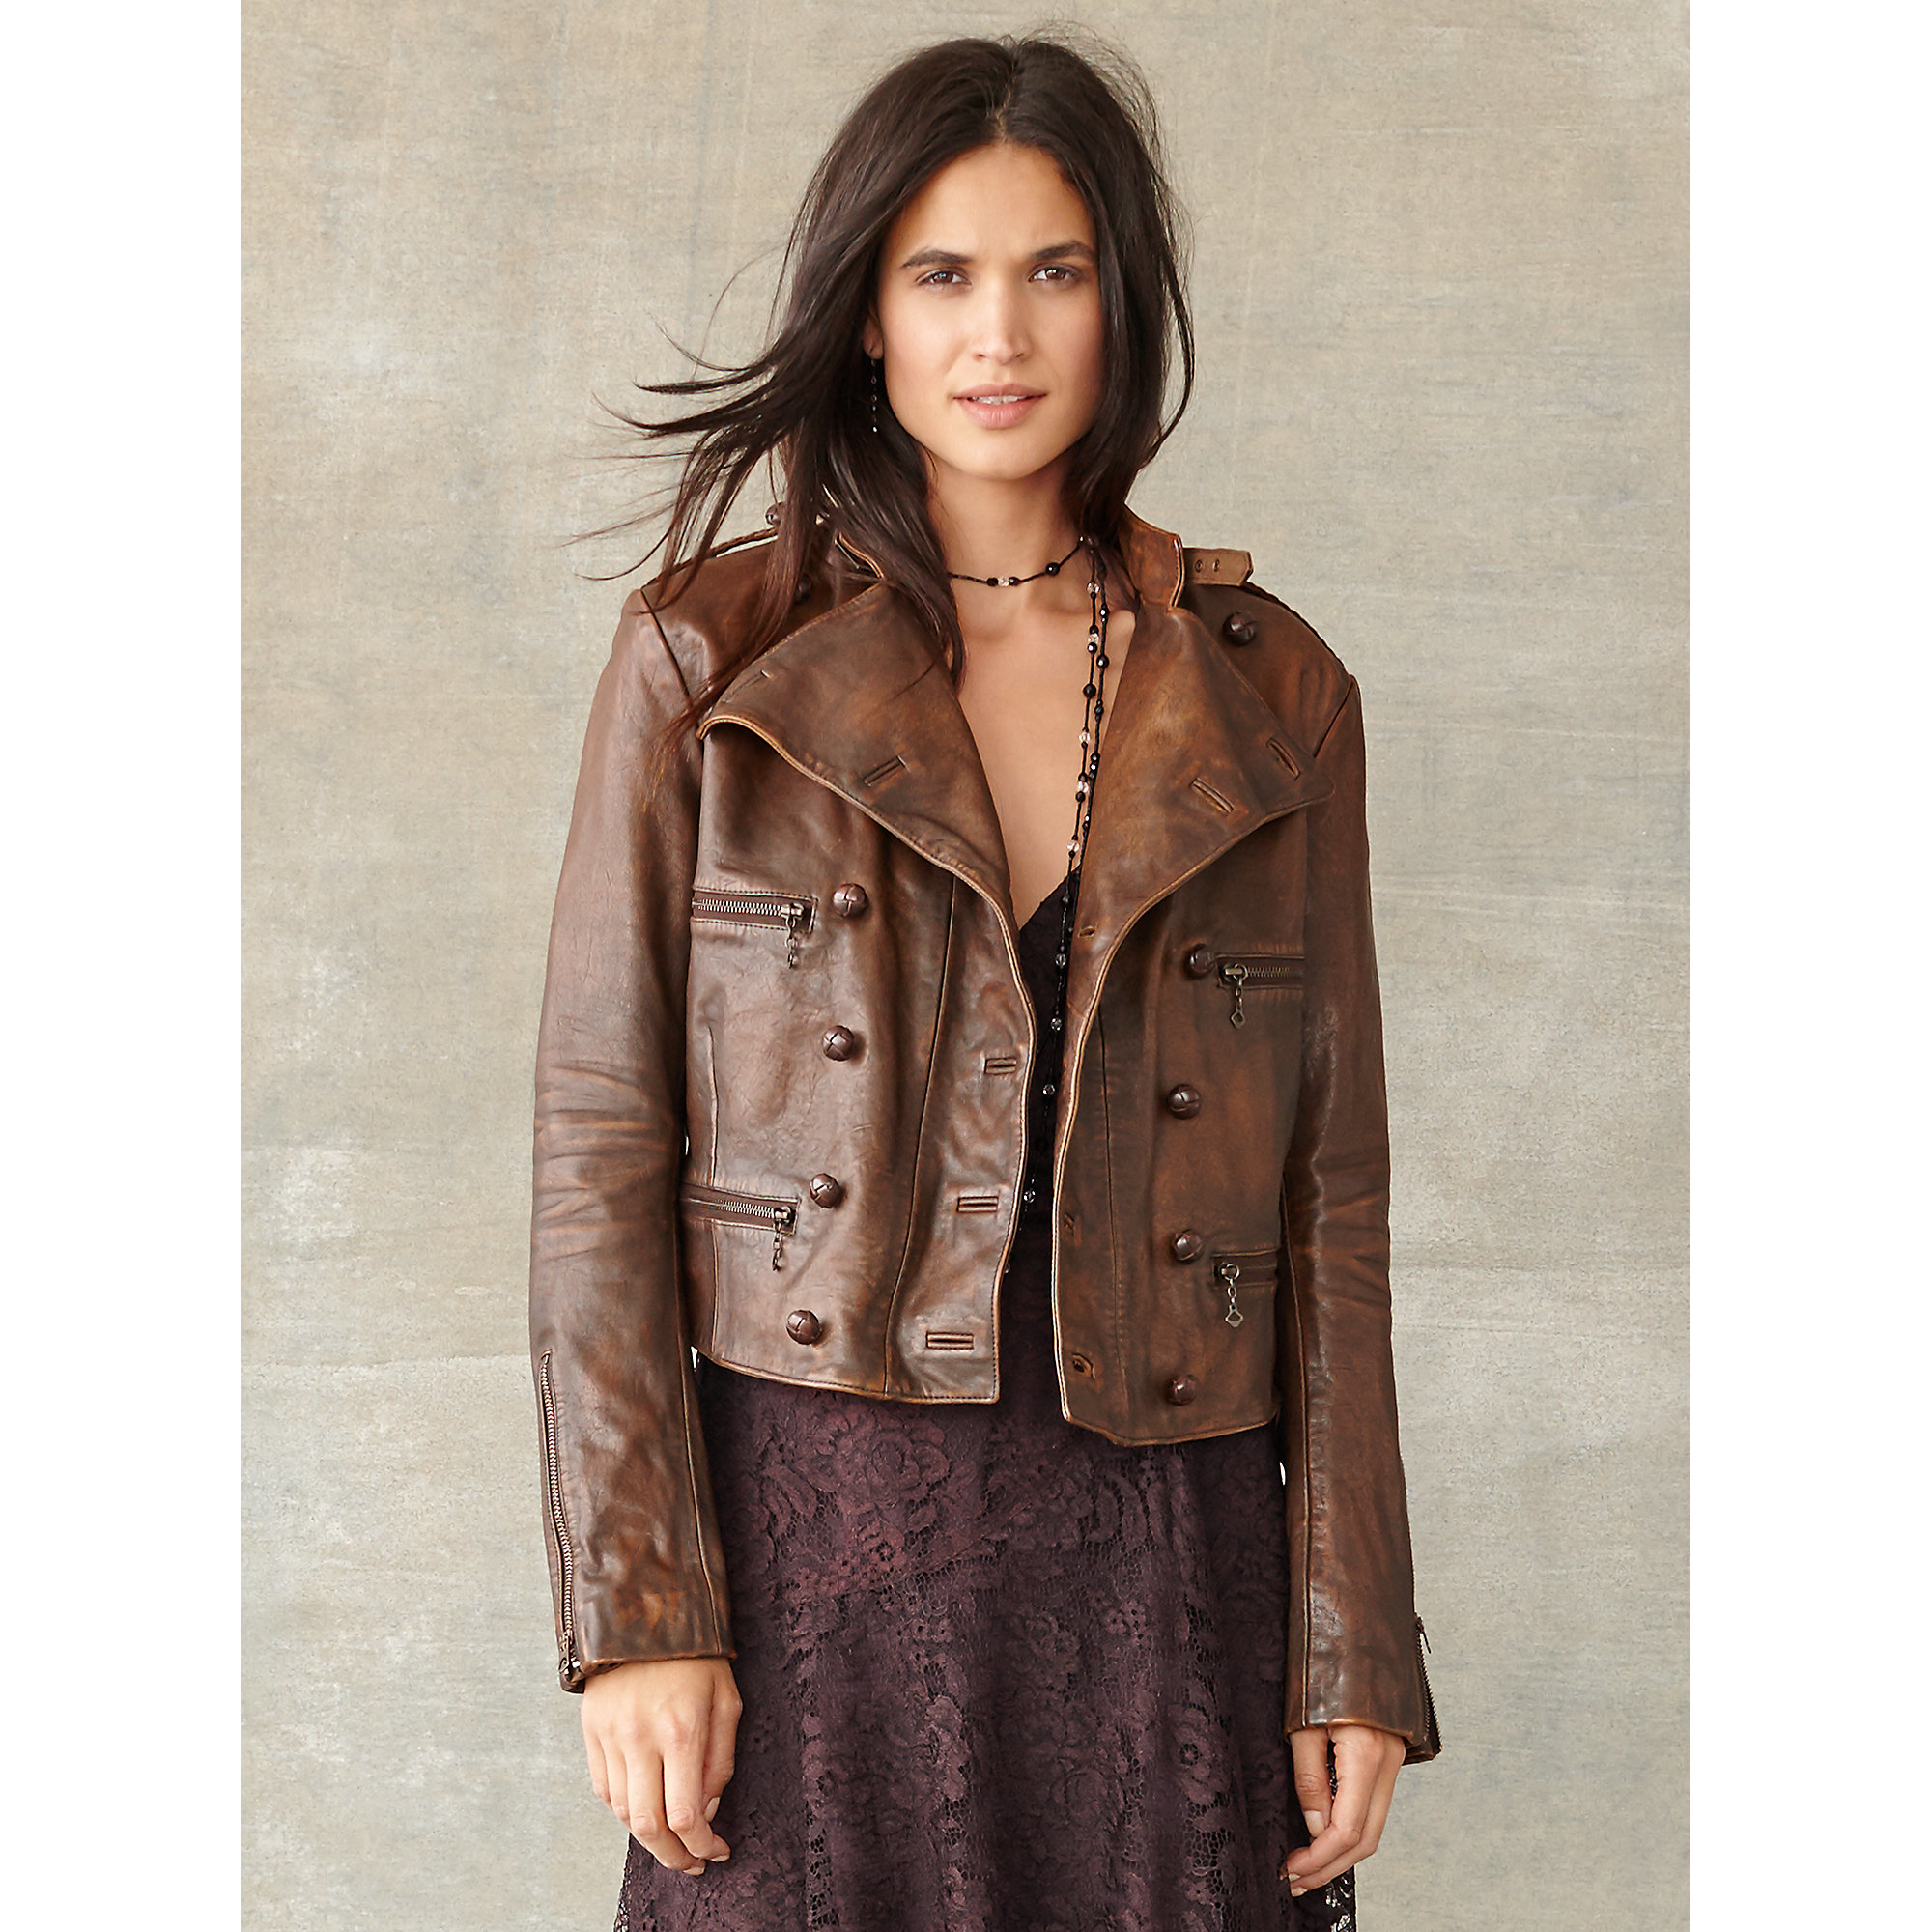 Lyst - Rrl Leather Rider Jacket in Brown